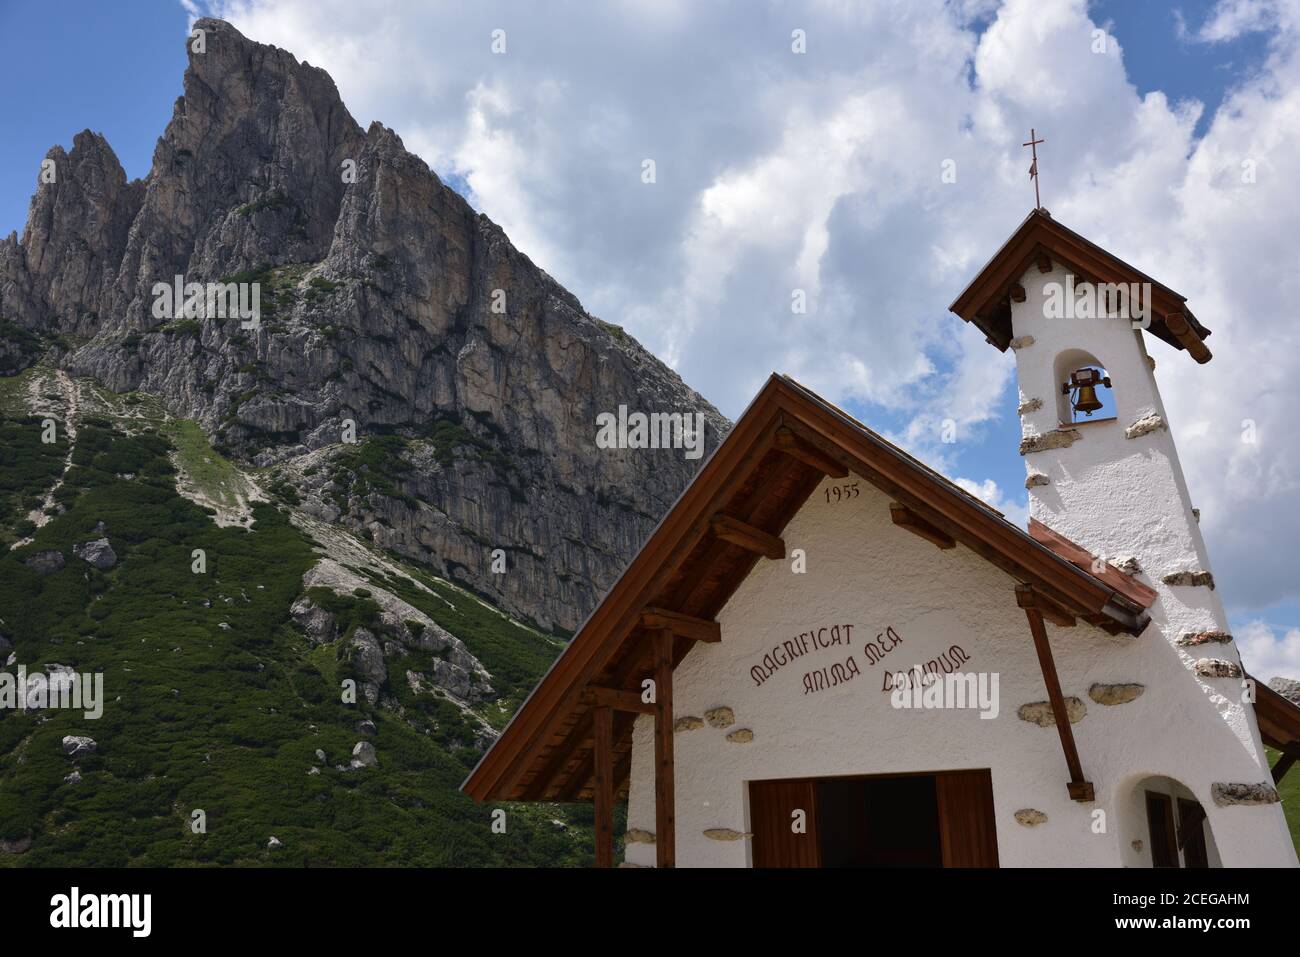 The small characteristic church of Passo Falzarego with Sass de Stria in the background Stock Photo